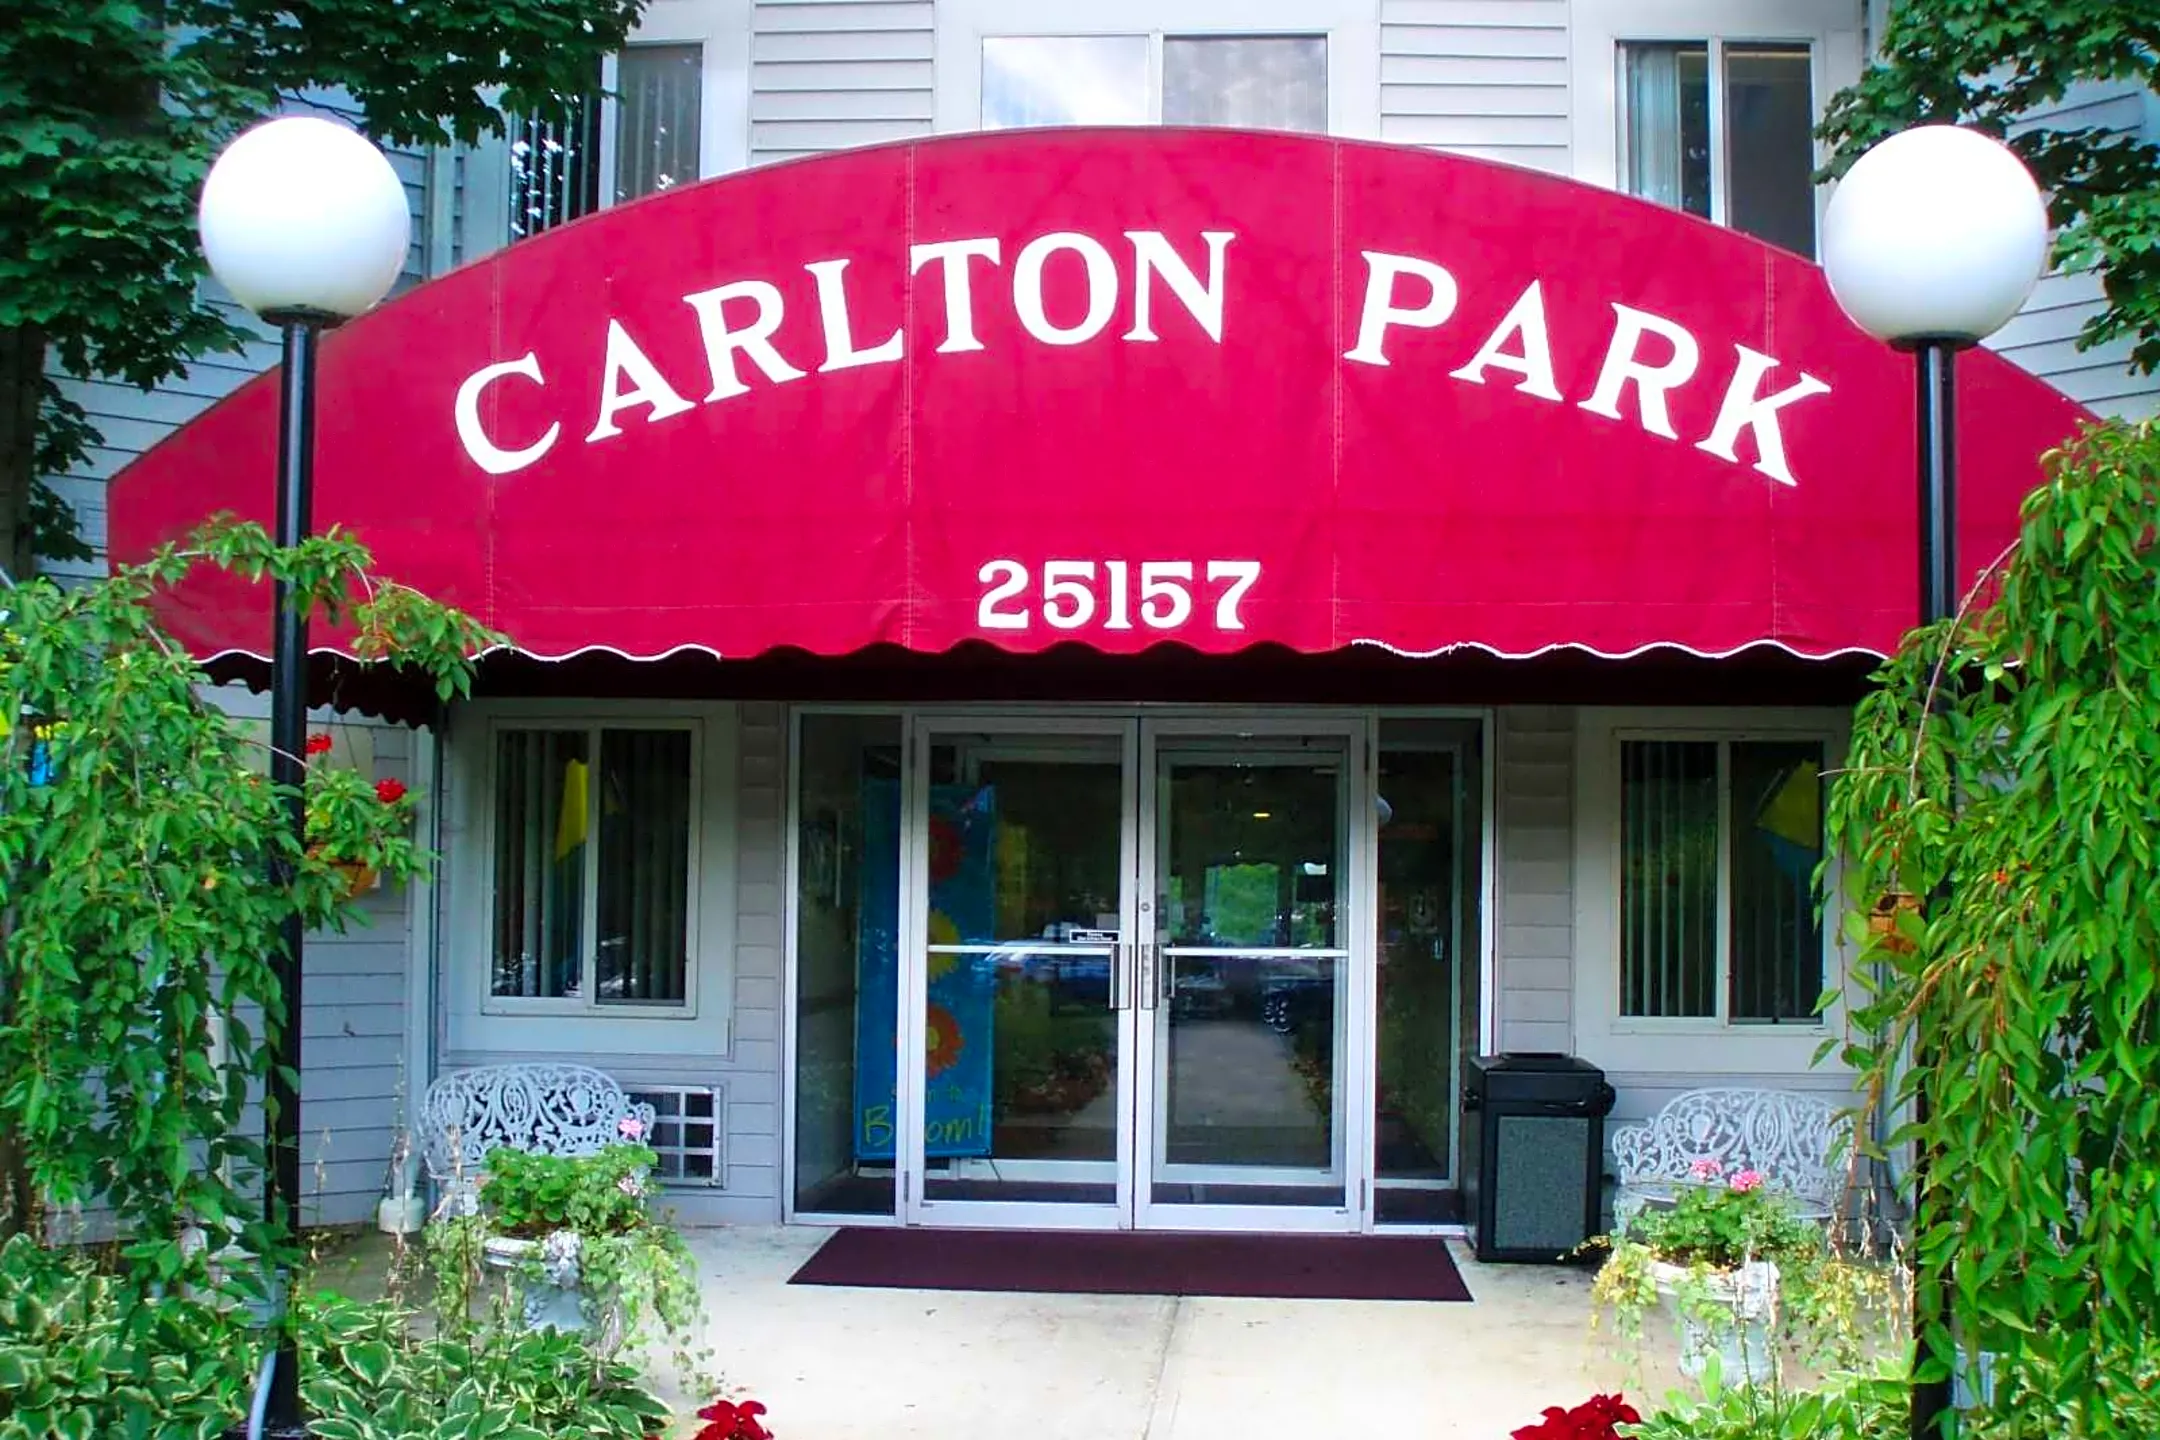 Building - Carlton Park Apartments - North Olmsted, OH